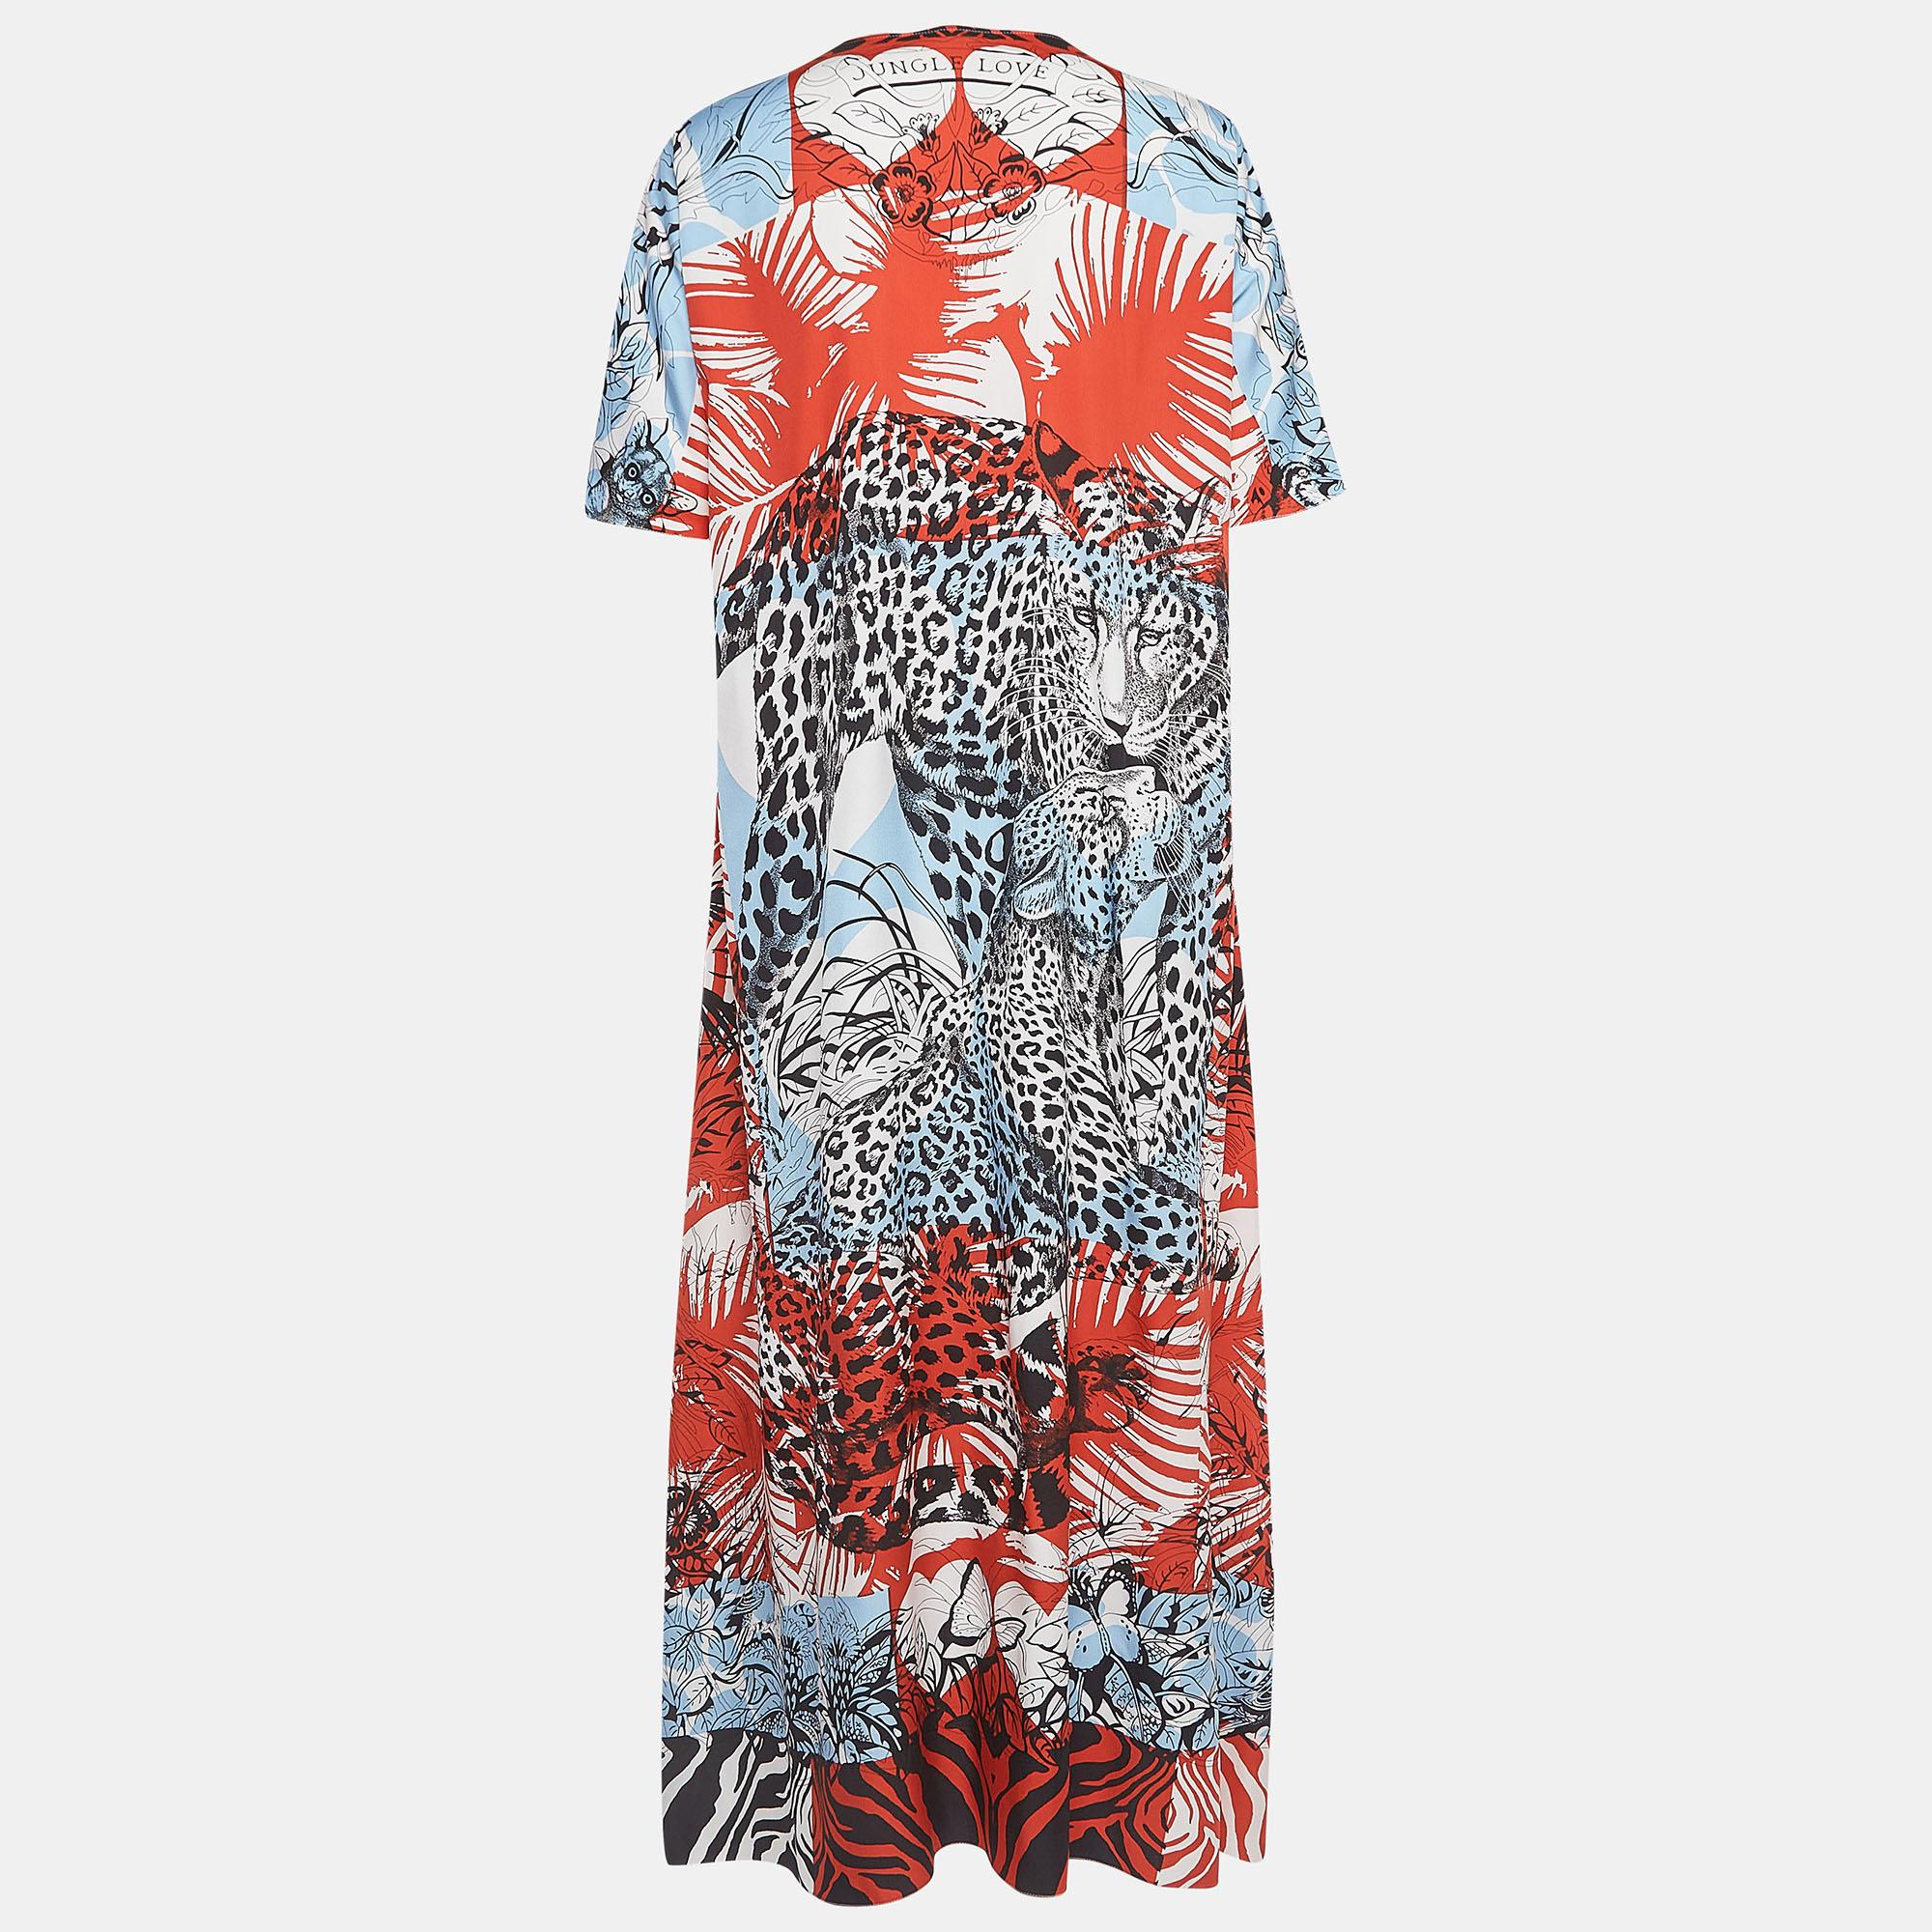 The free-flowing silhouette of the Hermès kaftan exhibits the label's flawless tailoring. It is stitched using quality materials, has intricate patterns, and can be easily styled with chic accessories, open-toe sandals, and sling bags.

